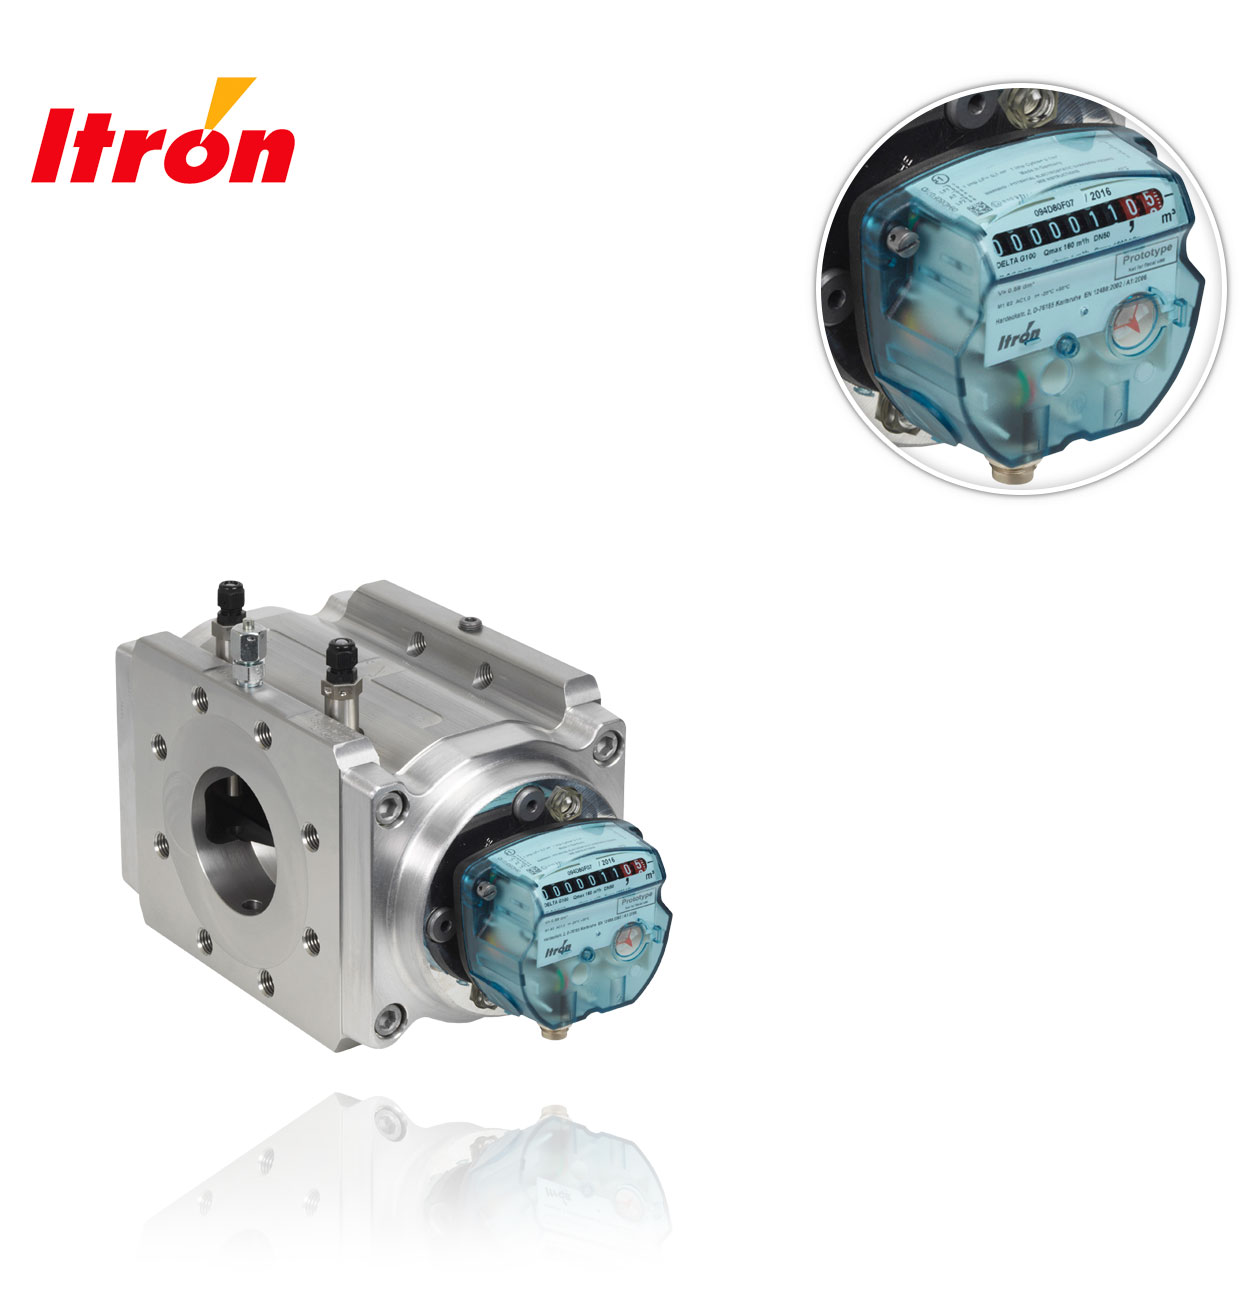 DELTA G100 DN50 maximum qty:160 DYNAMIC:160 LENGTH:171mm ITRON EXTENDED DYNAMIC ROTARY PISTON METER